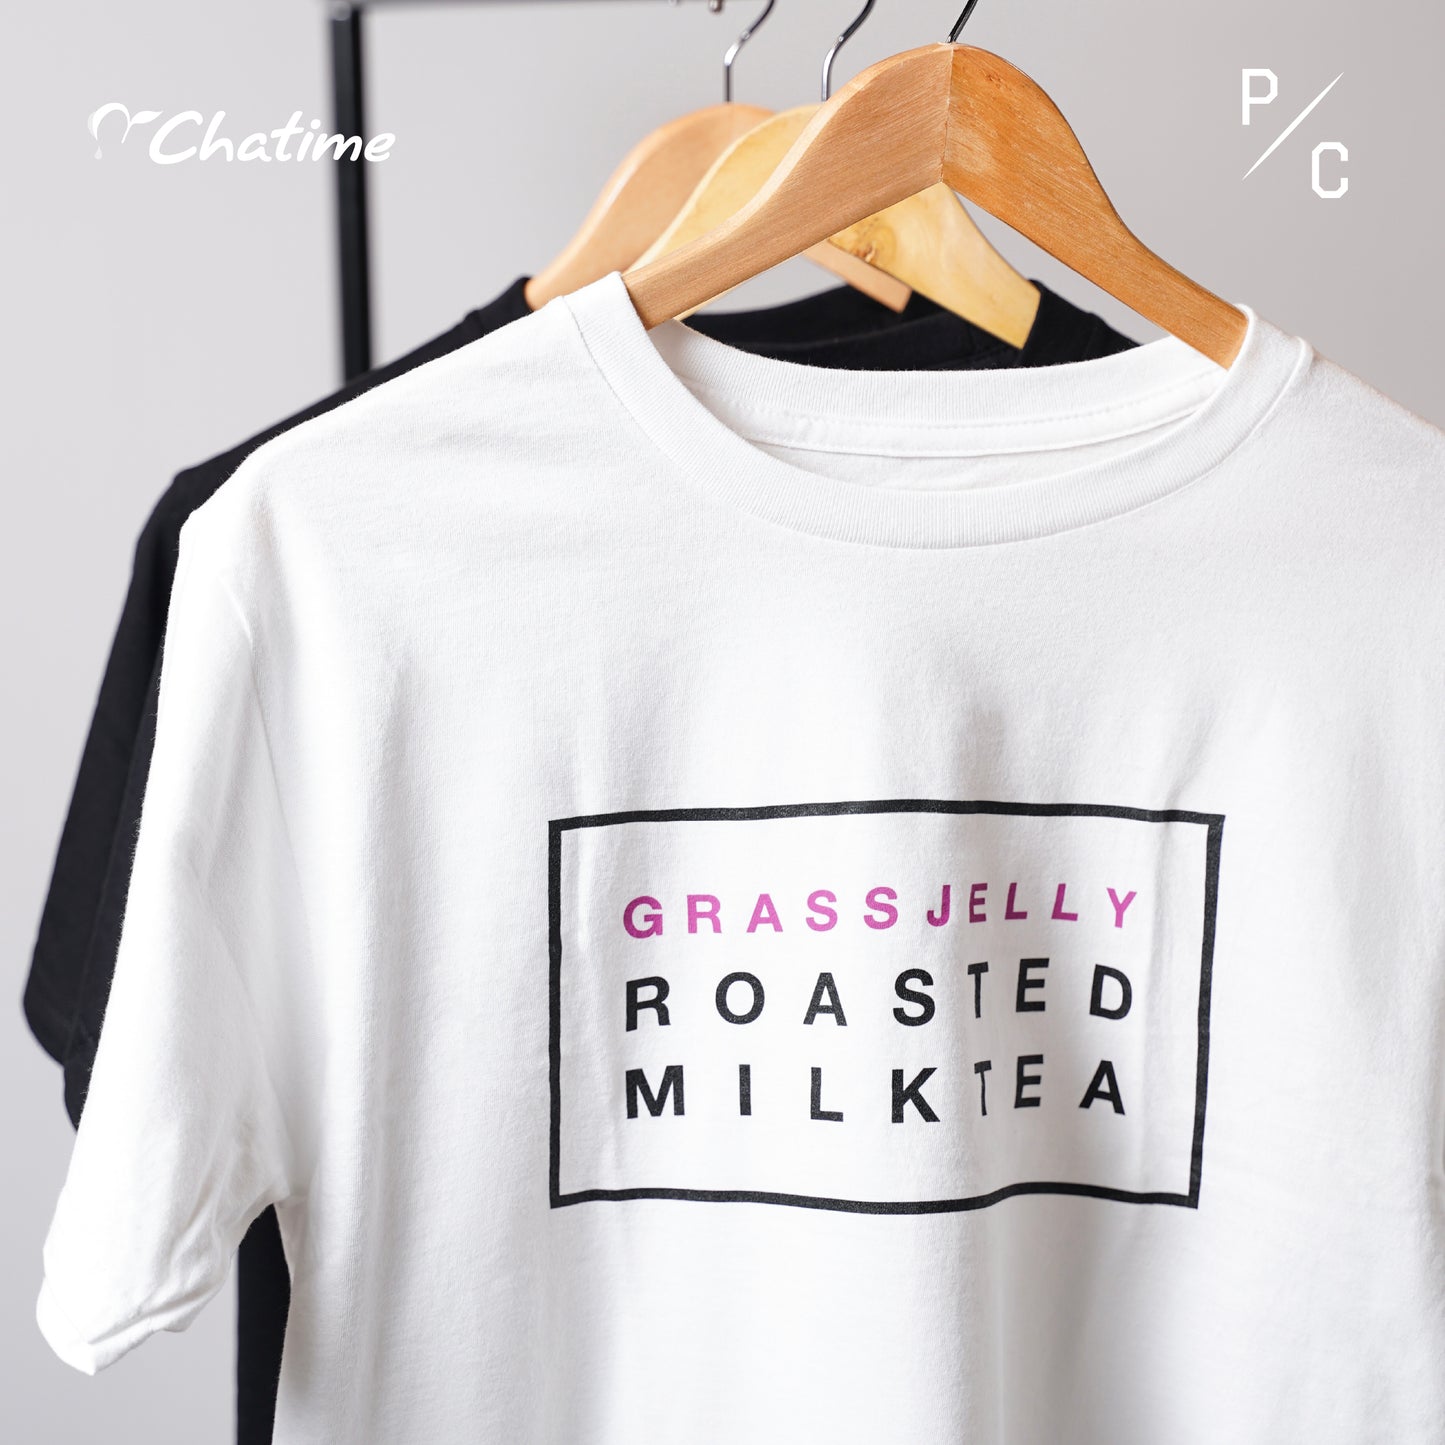 Chatime x Peace Collective Grass Jelly Roasted Milk Tea T-shirt  (Limited Edition)